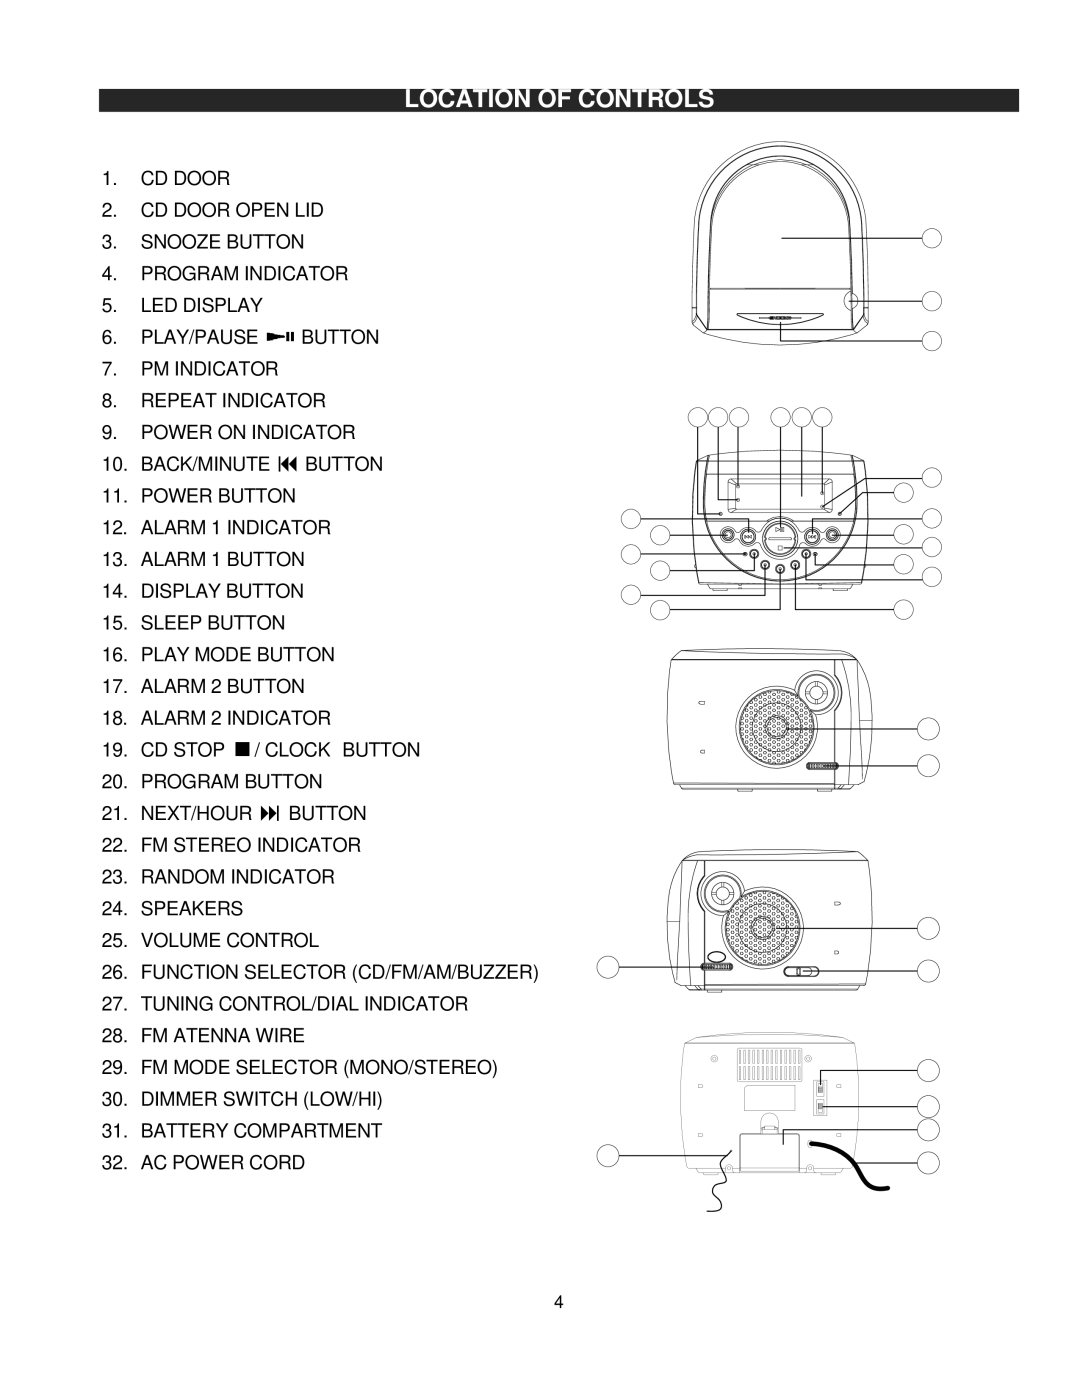 Spectra KT2053 owner manual Location of Controls 